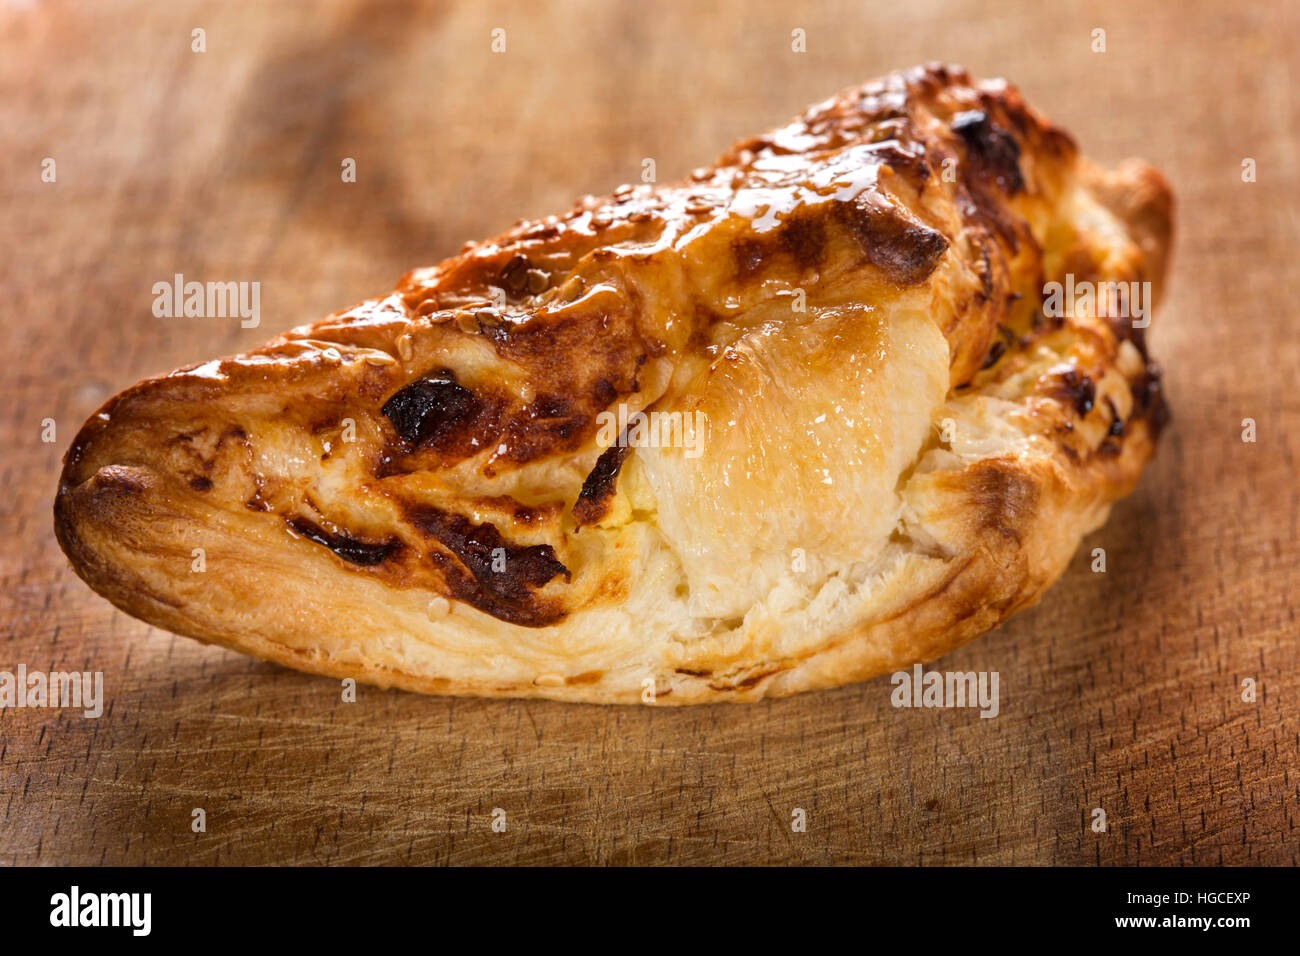 Cheese patty smeared with honey and sesame seeds on wooden background Stock Photo